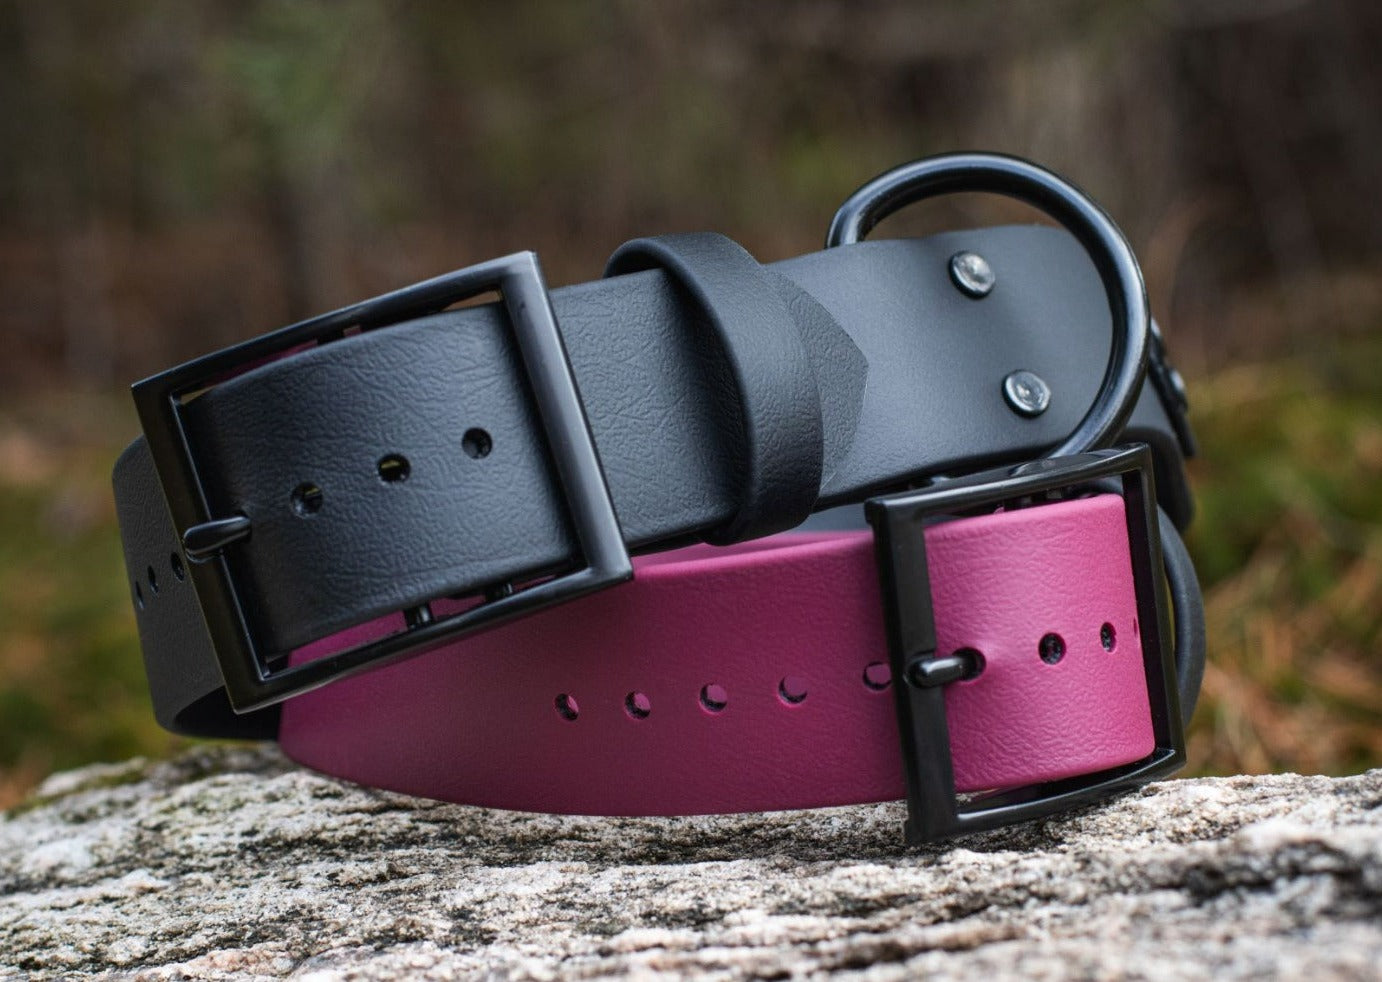 Backwoods Dog 1.5" BioThane Buckle Dog Collar with black buckle and hardware in wine and black